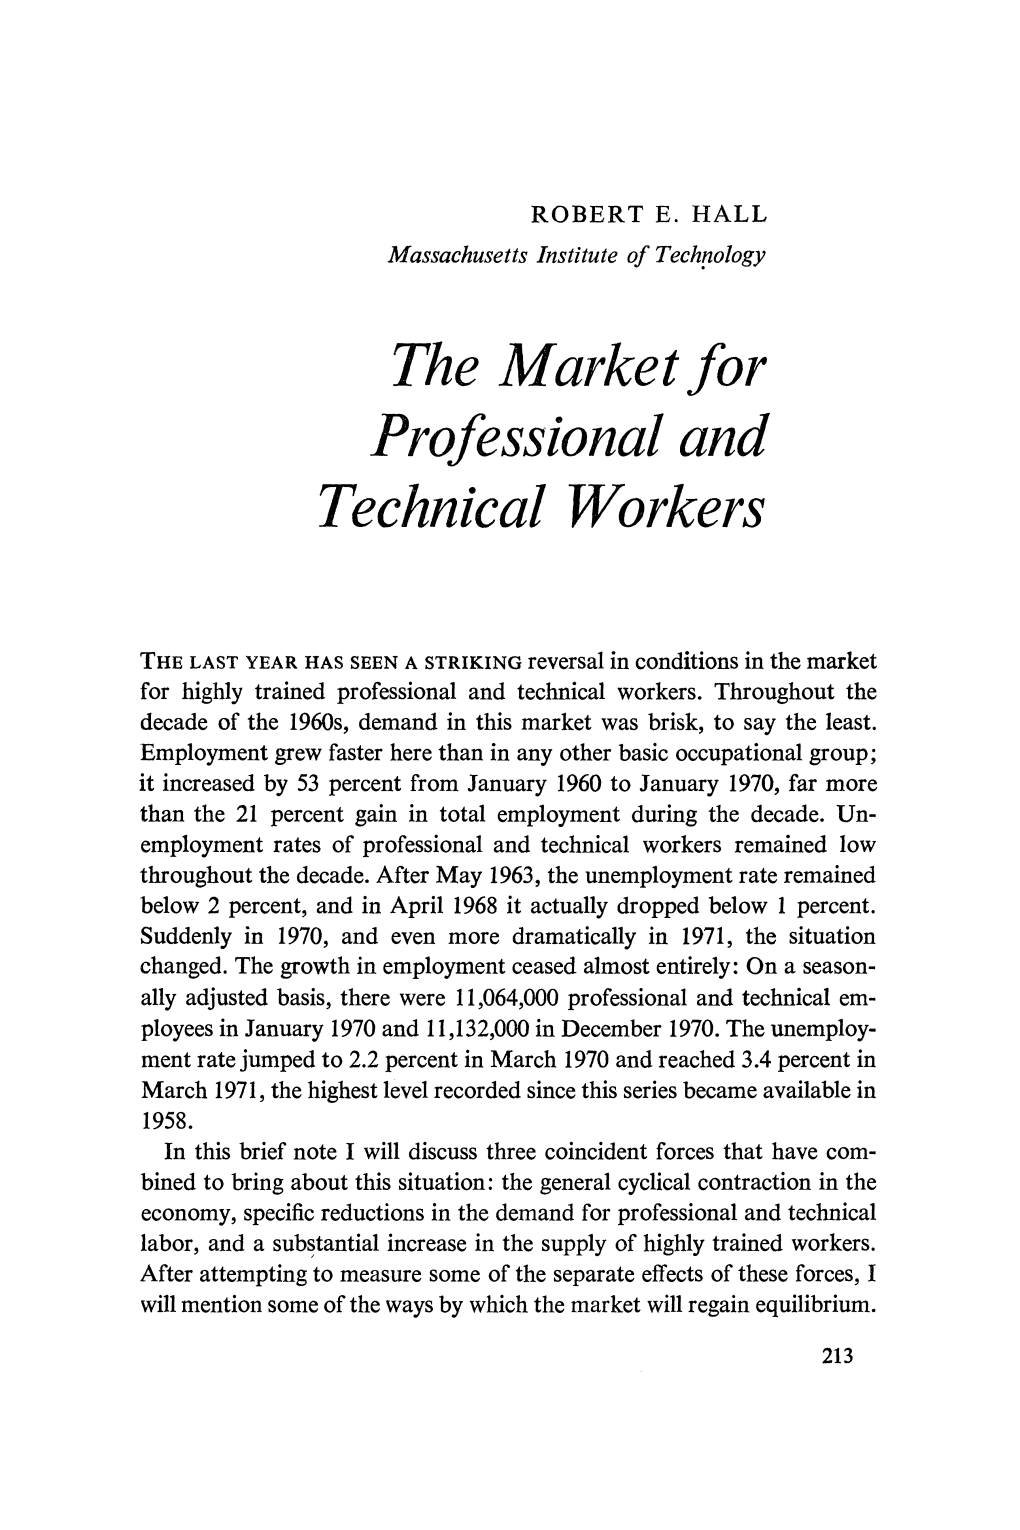 The Market for Professional and Technical Workers